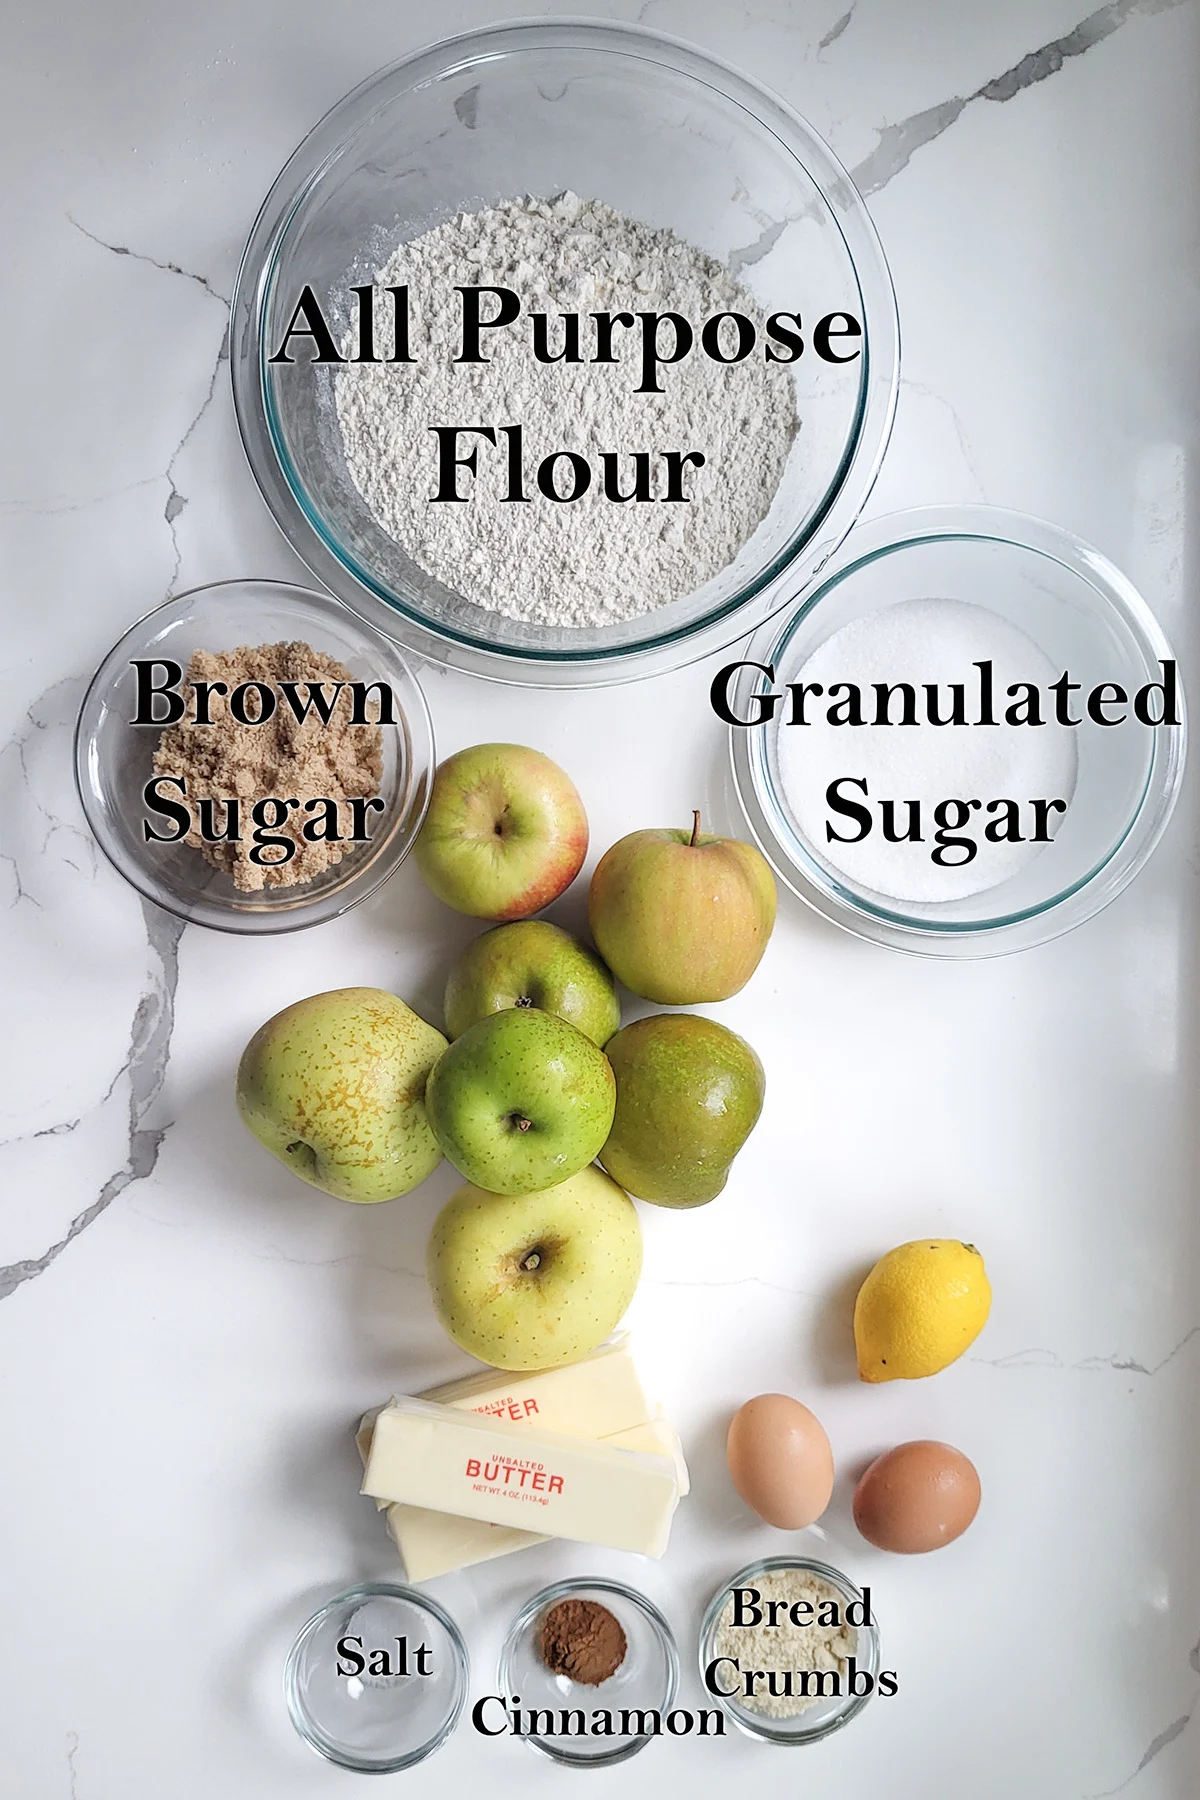 ingredients for dutch apple tart in glass bowls on a white surface.